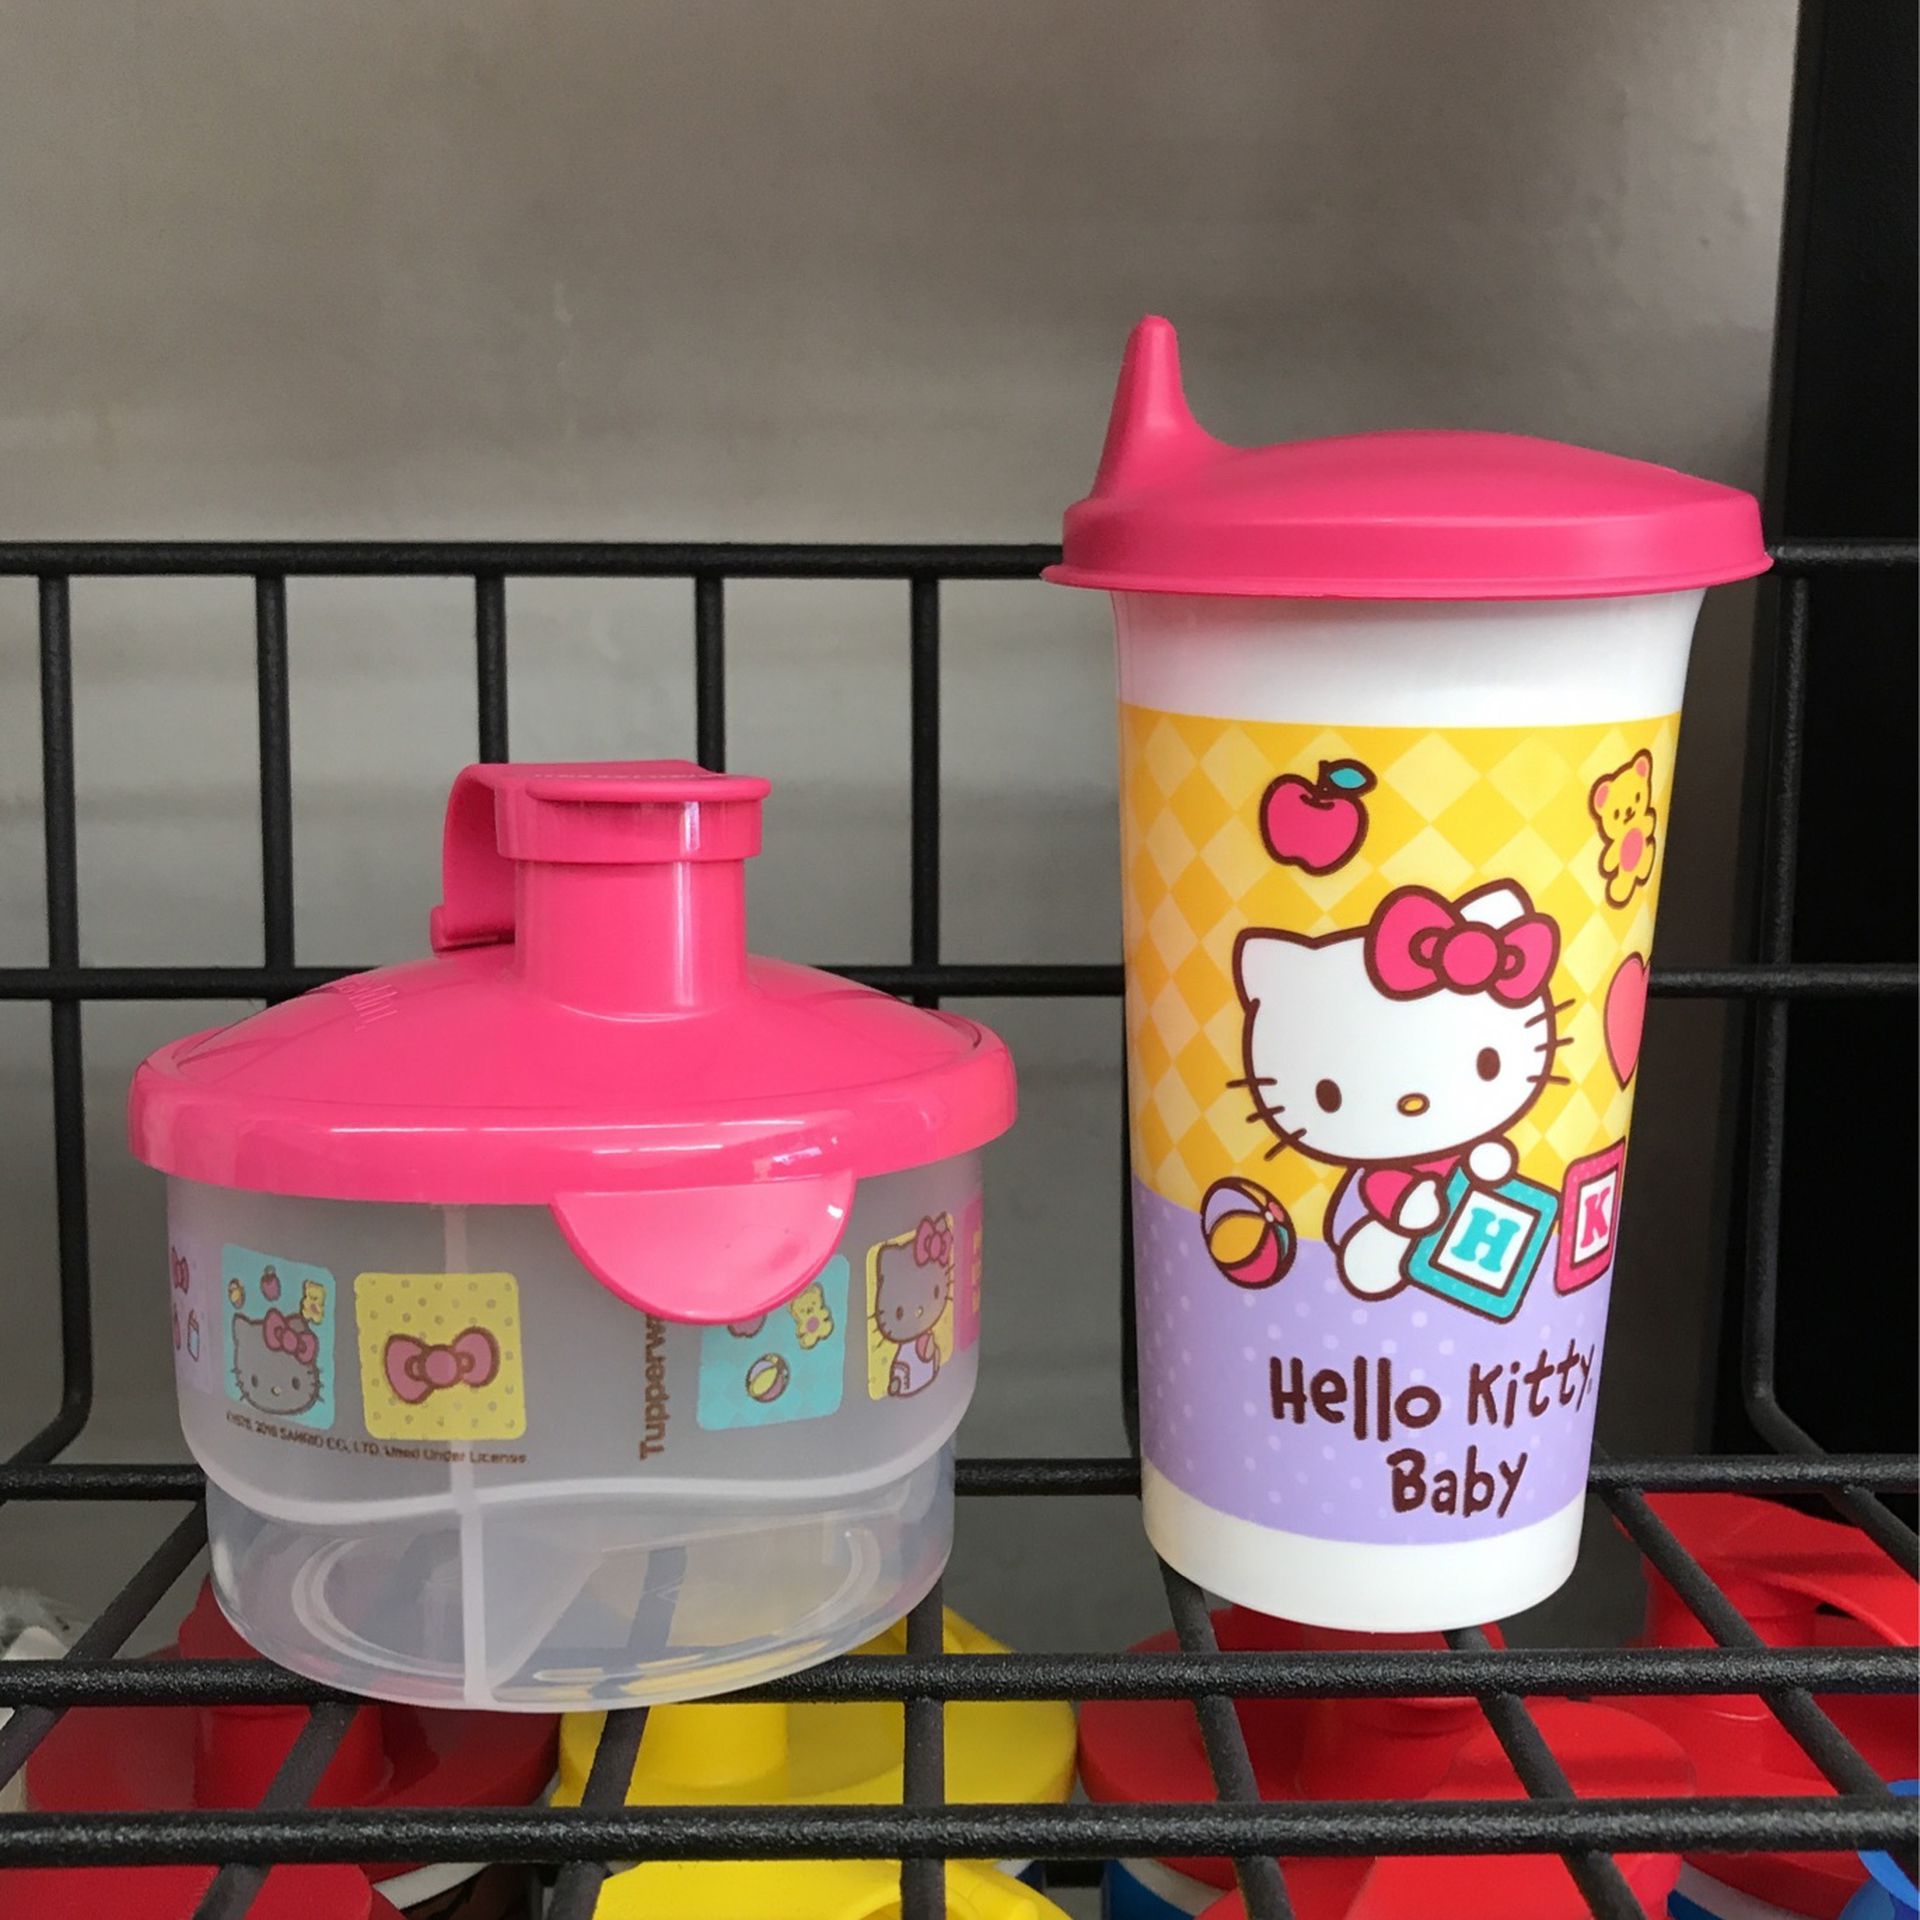 Tupperware Set of Hello Kitty Baby Bottle Feeder with container included